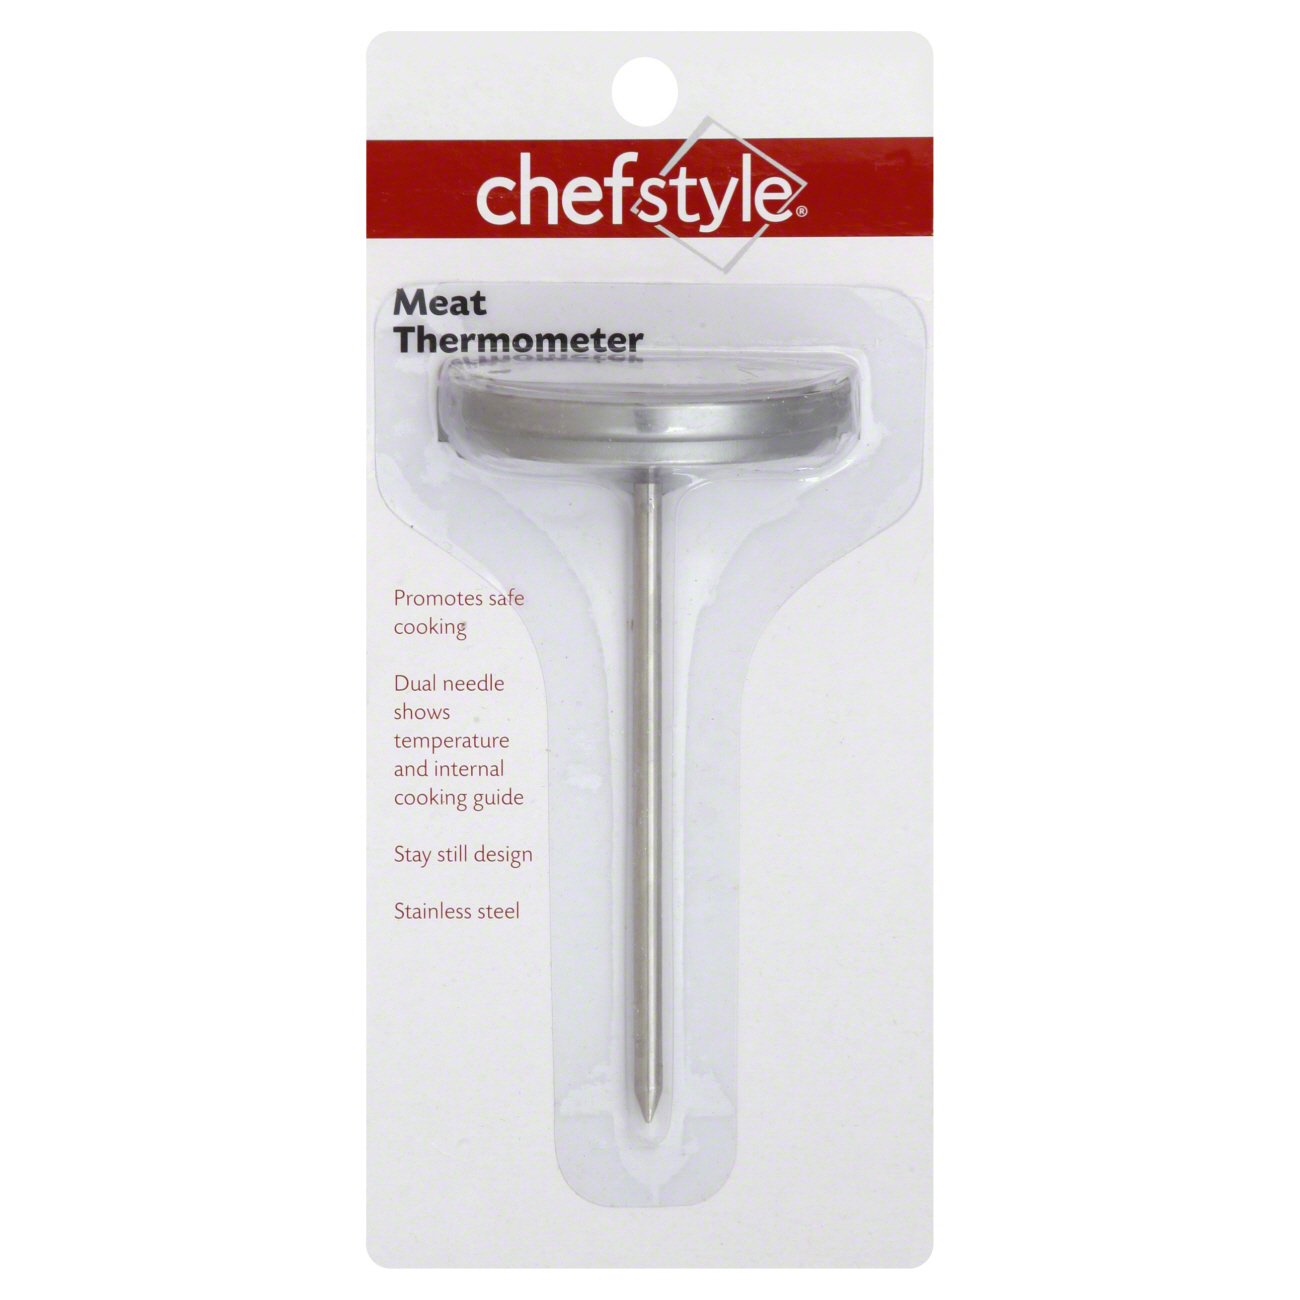 Good Cook Precision Meat Thermometer - Shop Utensils & Gadgets at